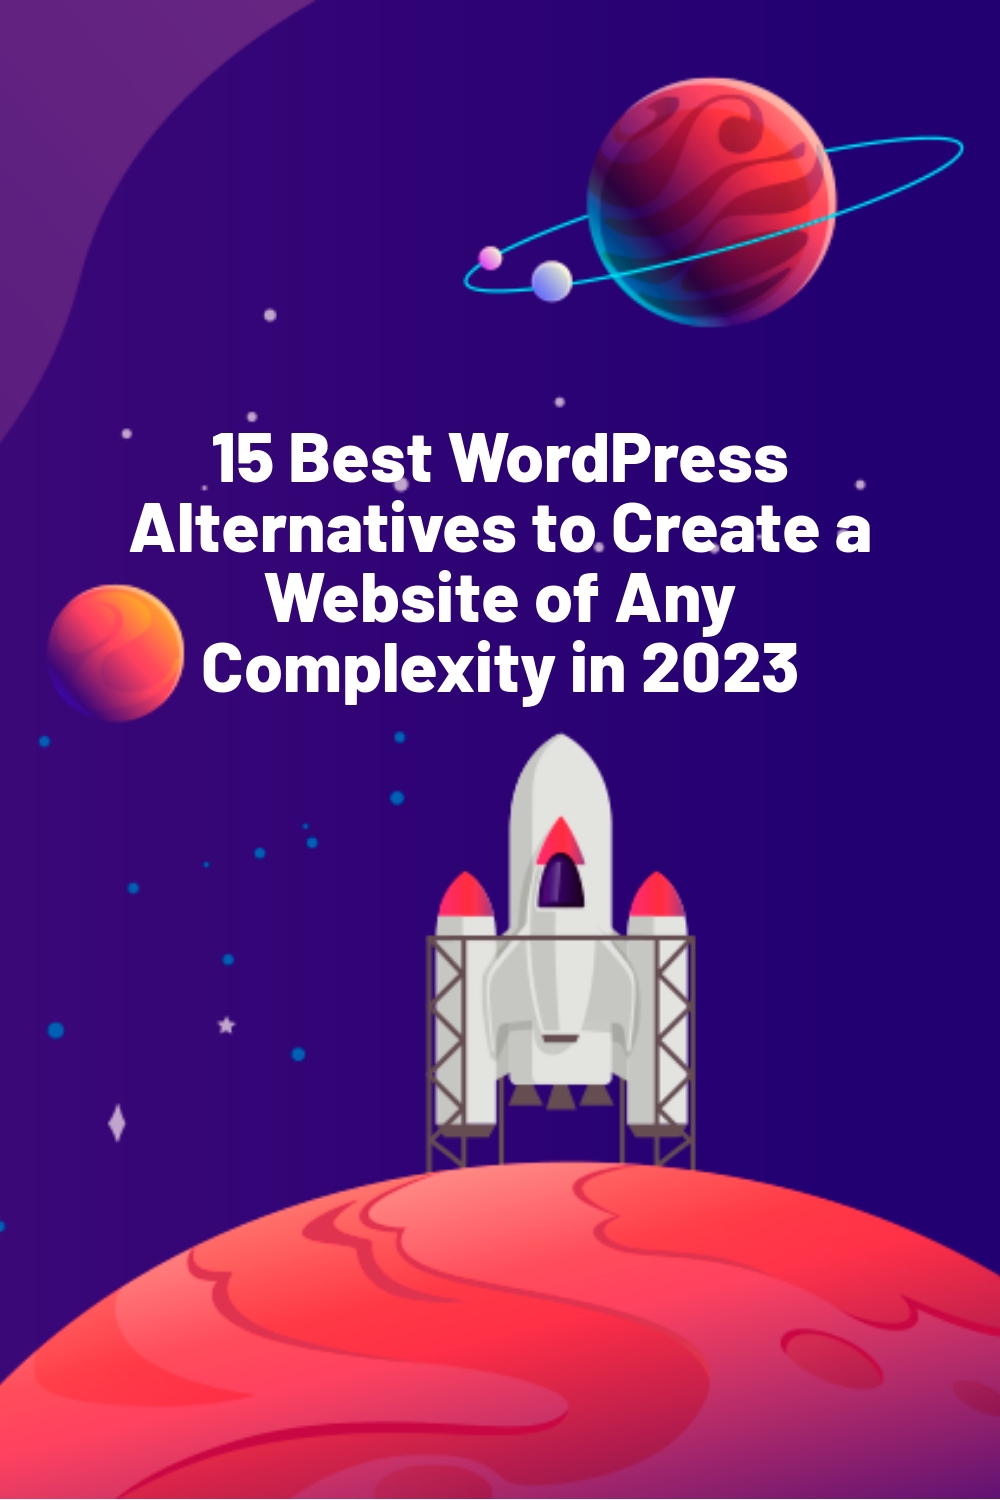 15 Best WordPress Alternatives to Create a Website of Any Complexity in 2023